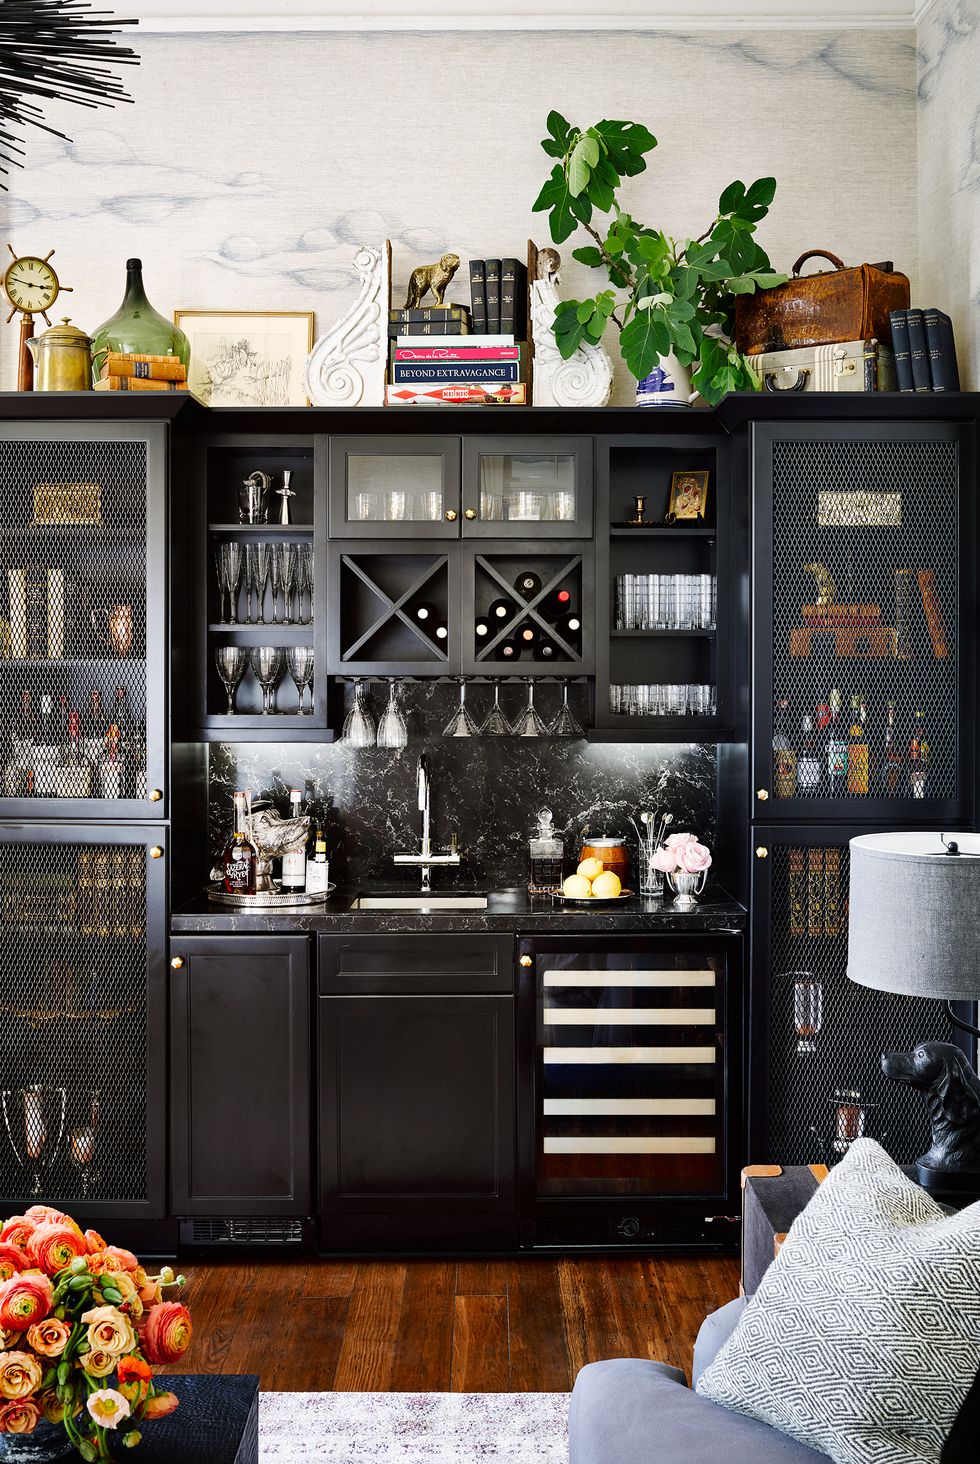 Home Bar Design - Latest Trends in Upscale Bars at Home